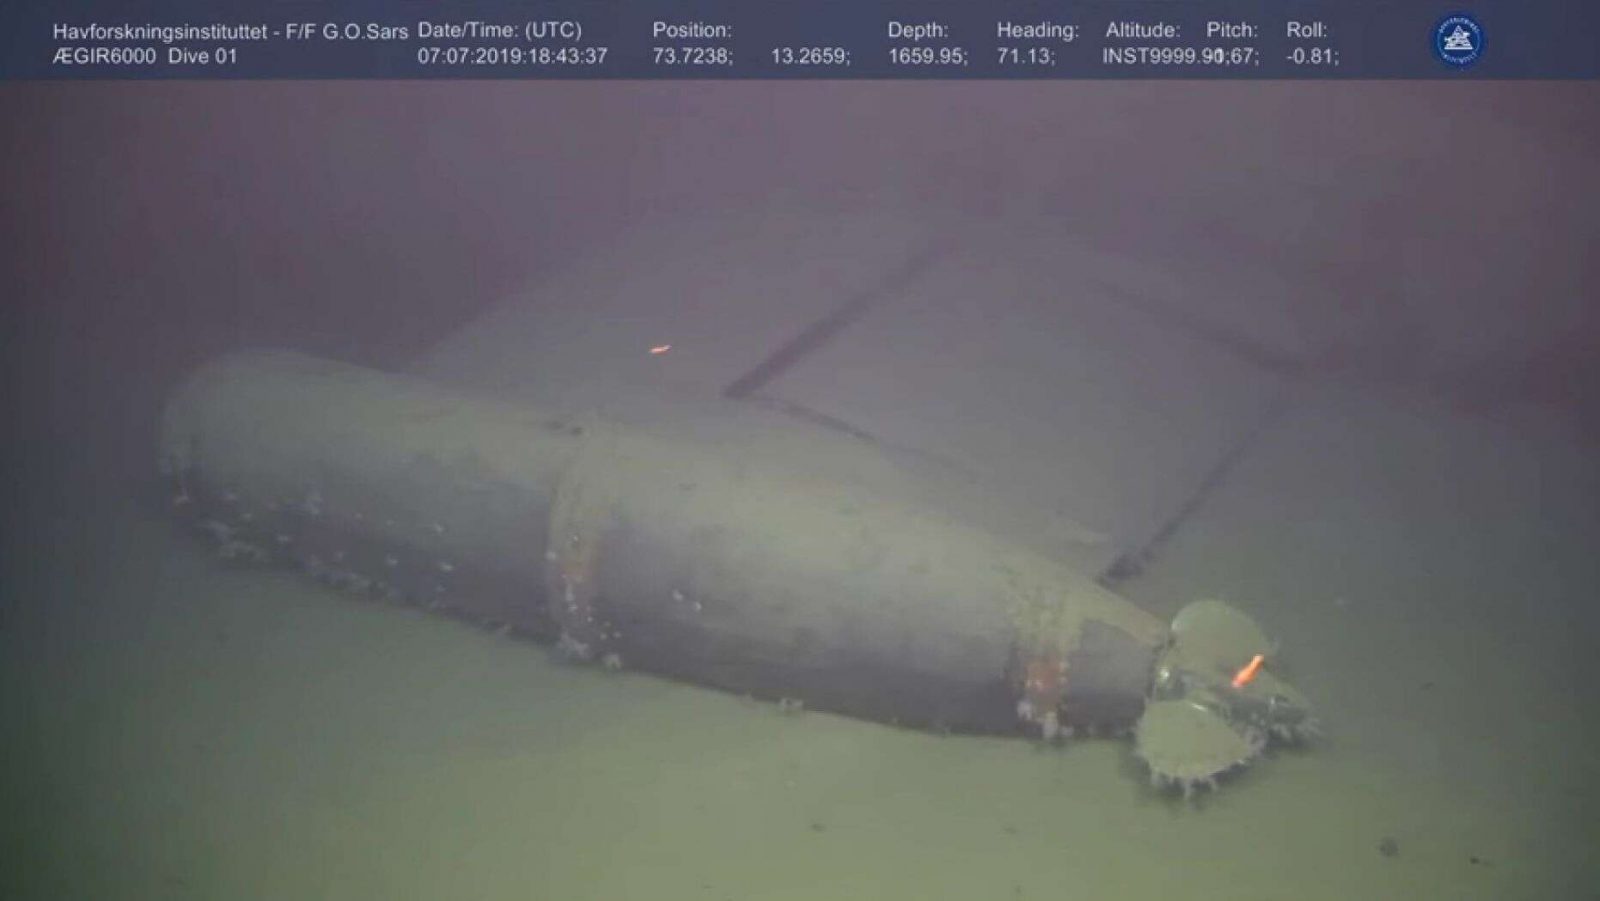 Scientists discover Radiation leak from Sunken Nuclear Submarine at Levels 800,000 times normal